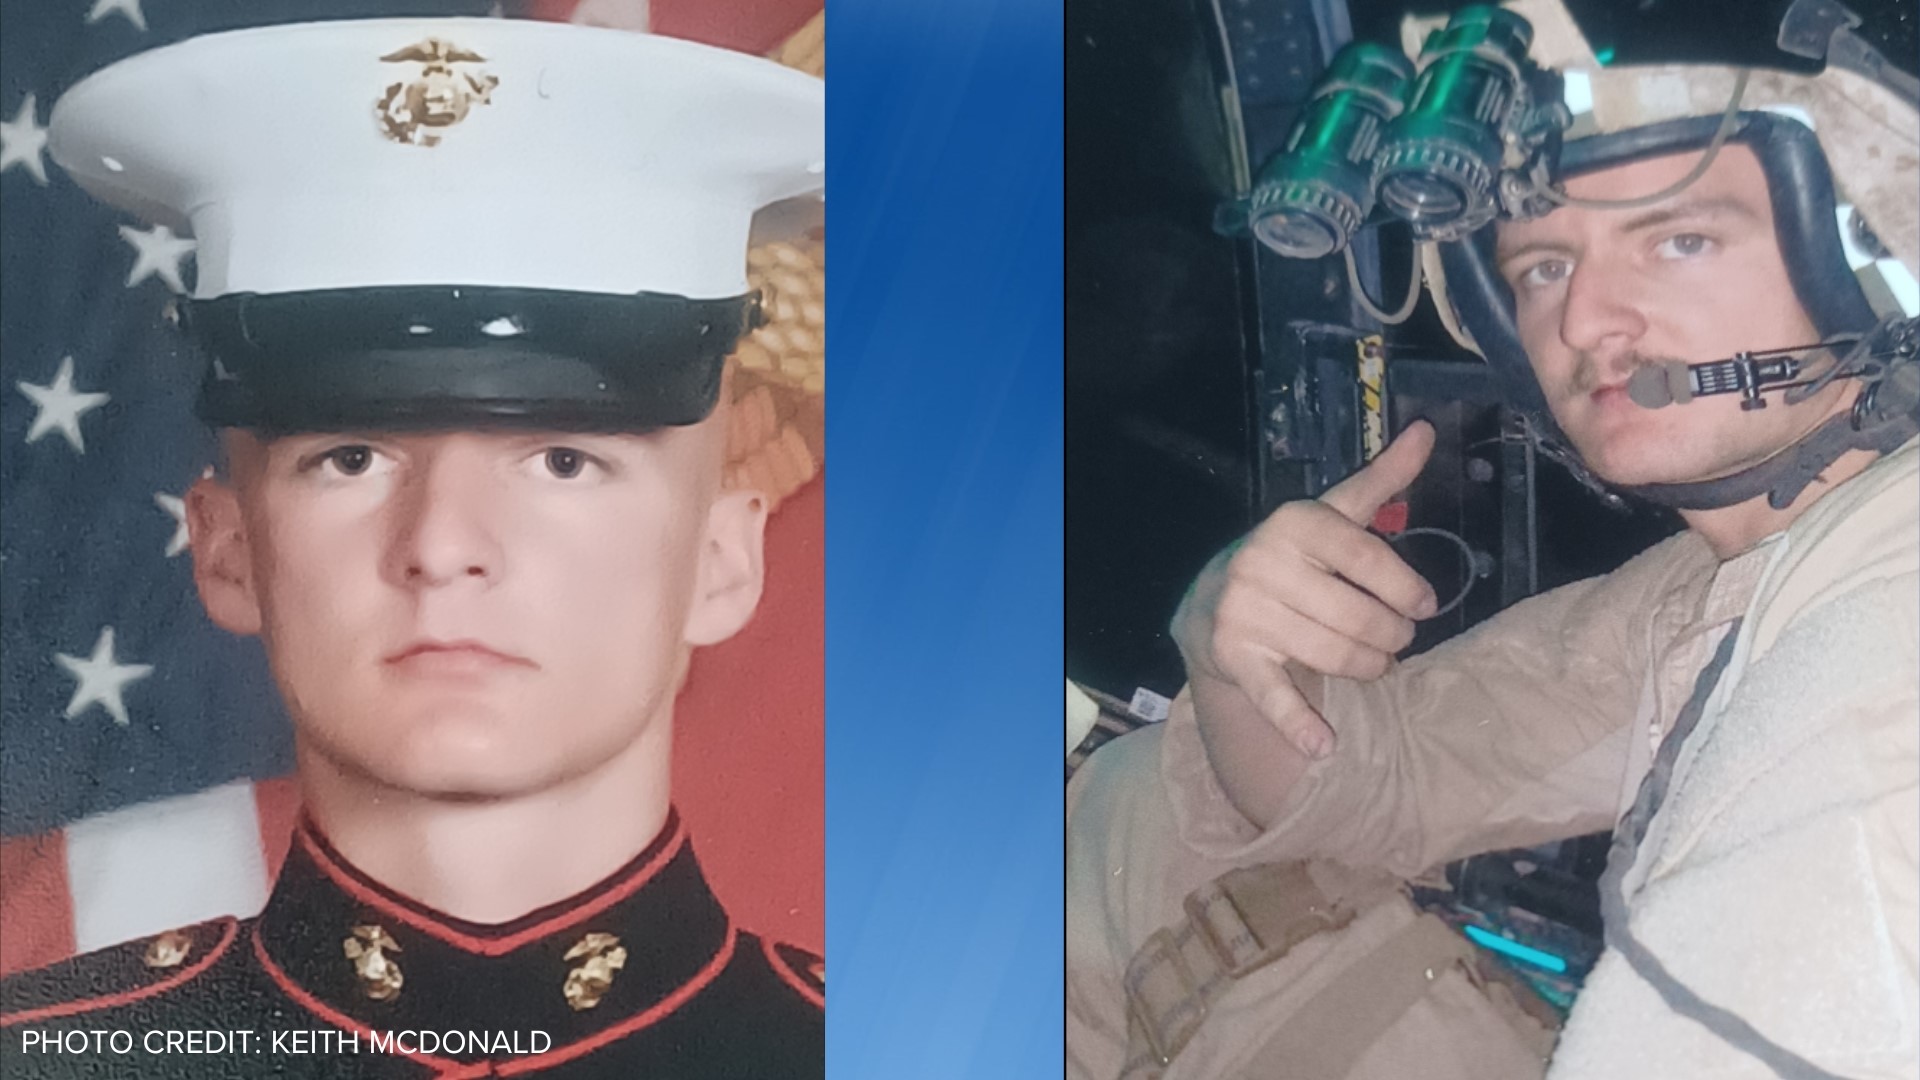 Family members identify 21-year-old Corporal Nathan Carlson as one of the fallen Marines.